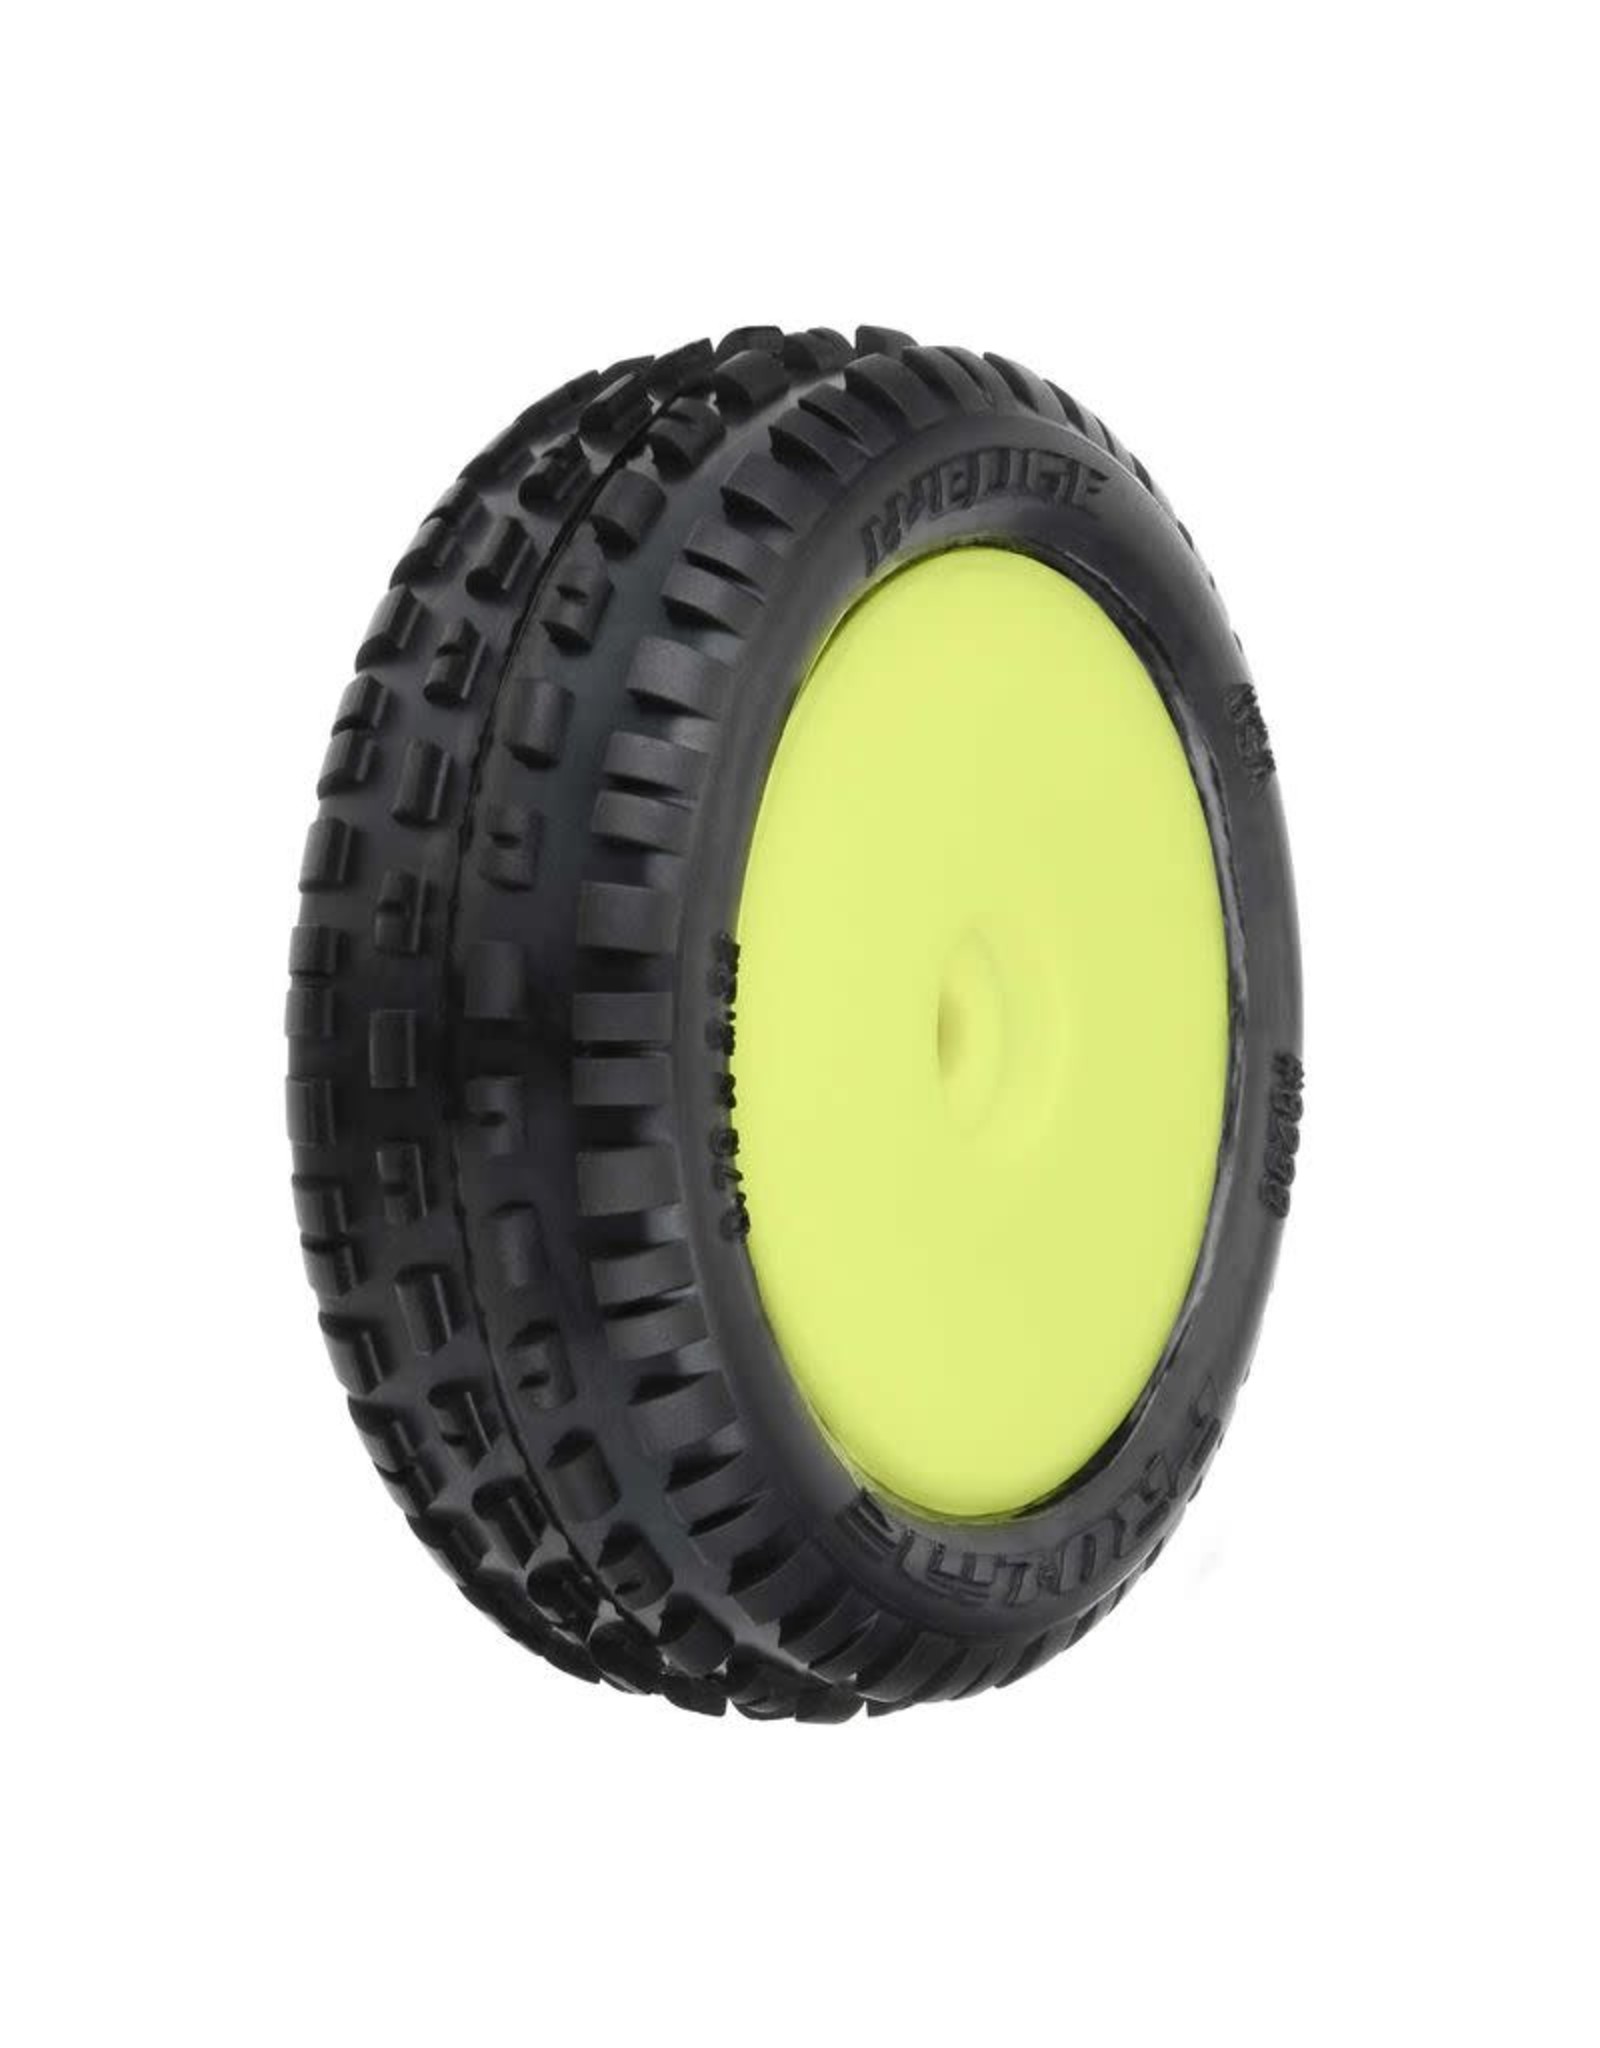 Proline 1/18 Wedge Front Carpet Mini-B Tires Mounted 8mm Yellow Wheels (2)